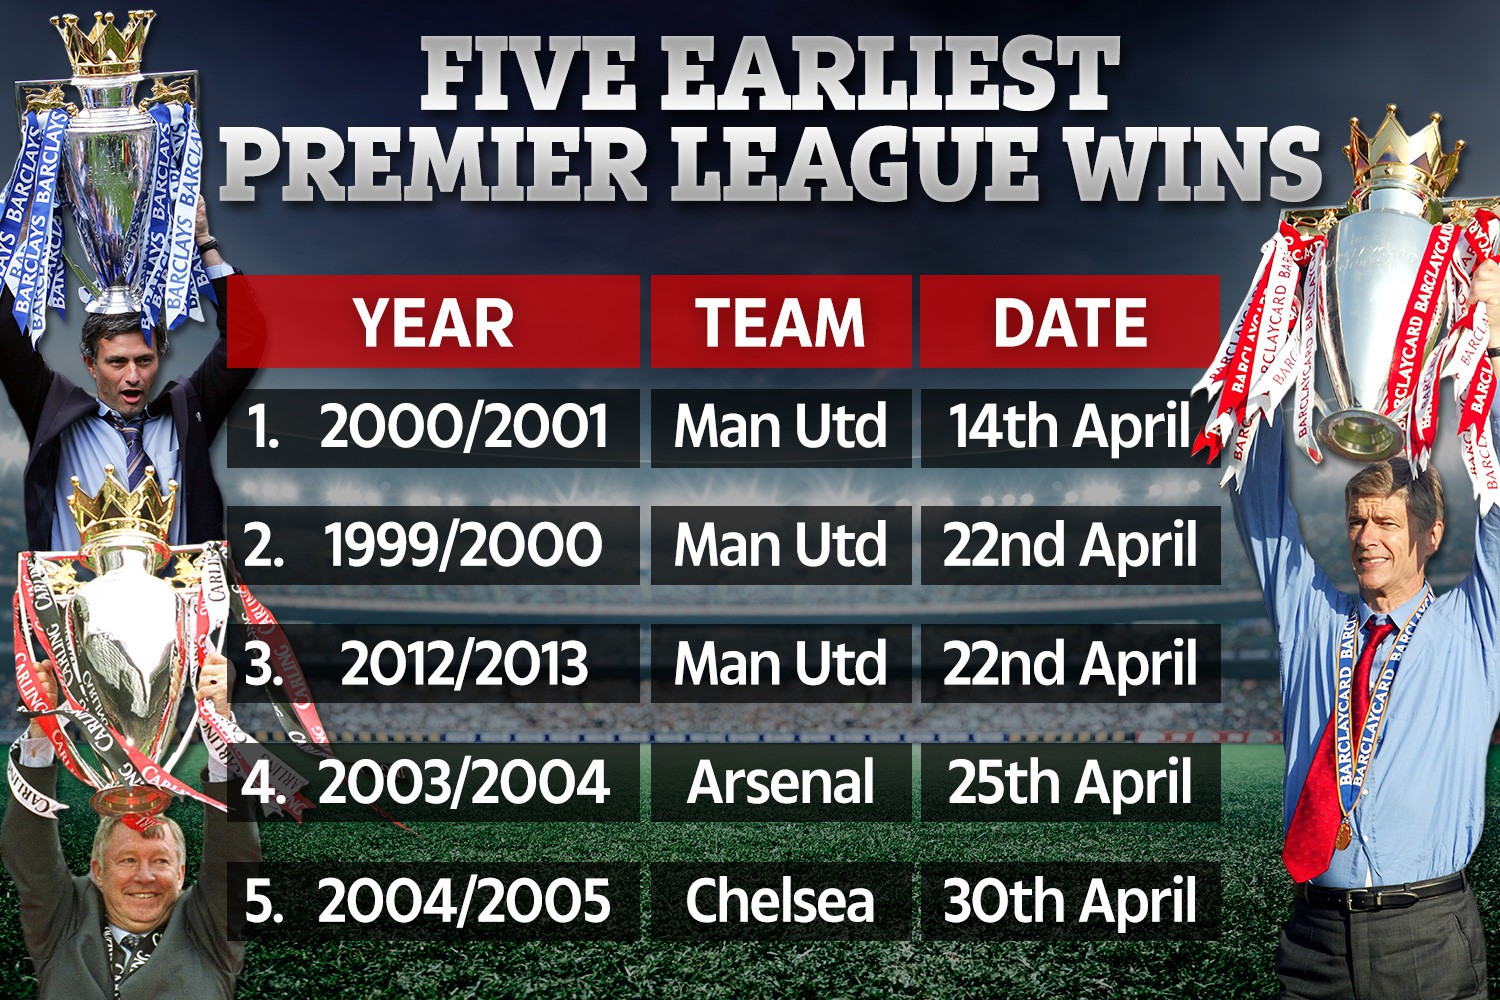 , How can Liverpool beat Man Utds record and become the earliest team ever to win the Premier League?